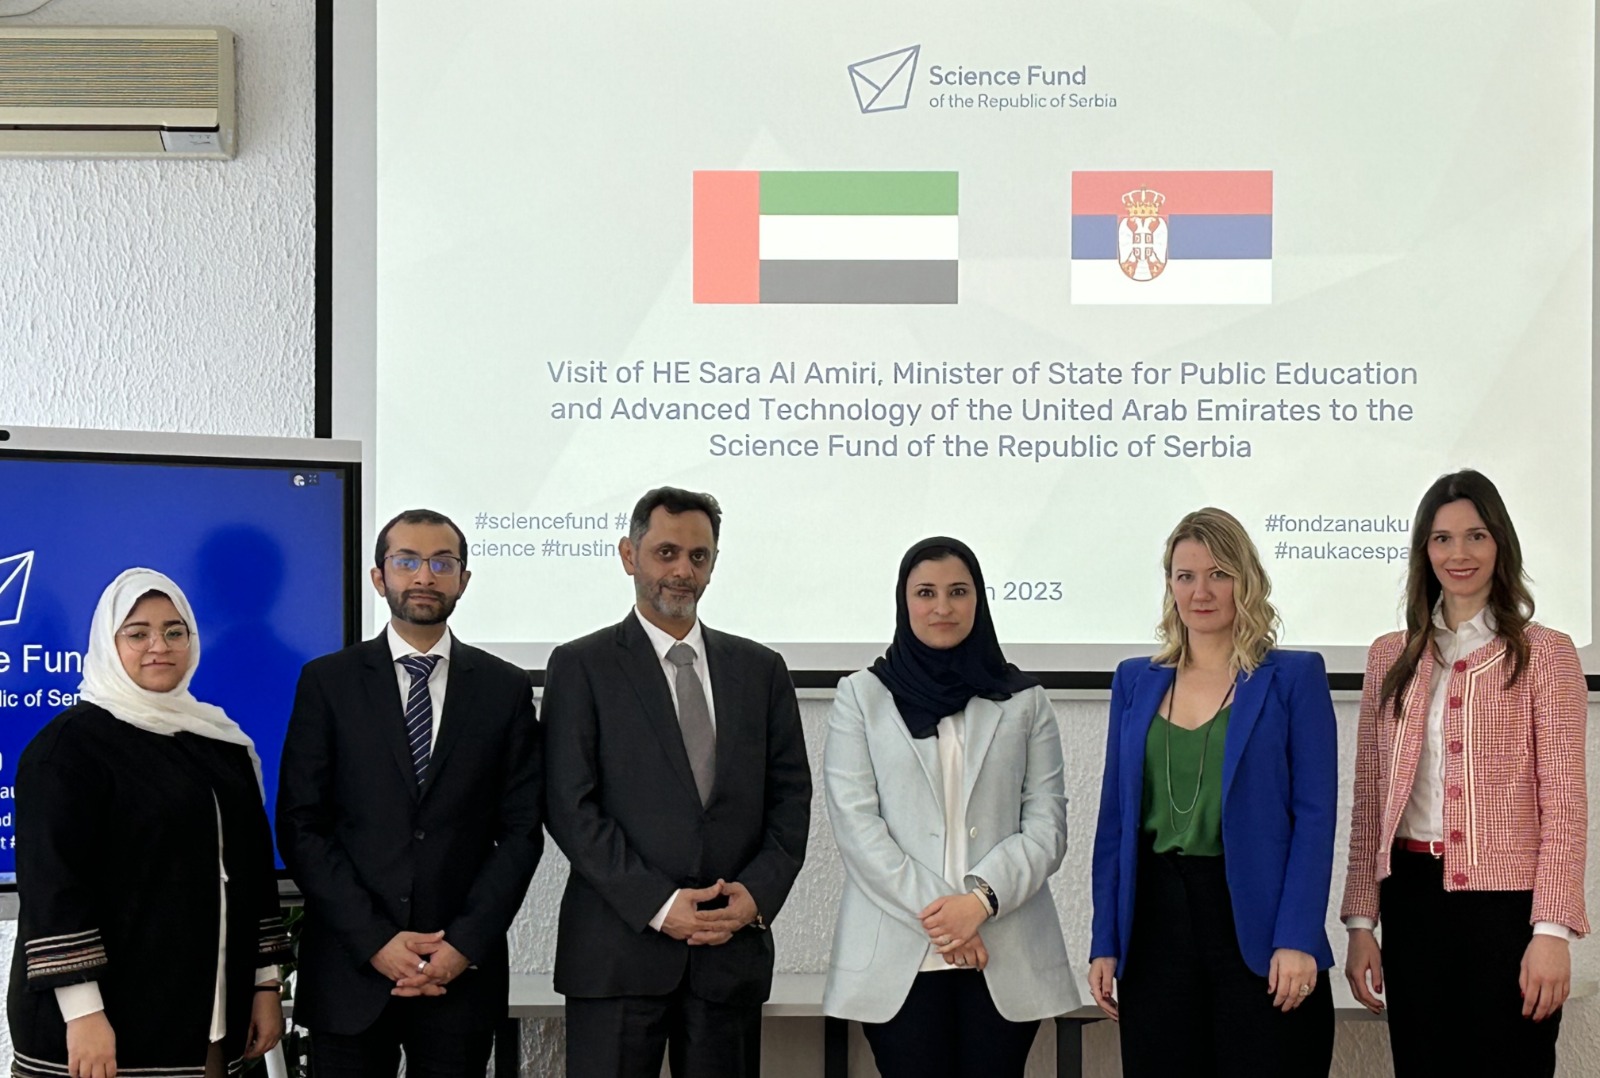 Her Excellency Sarah Al Amiri visits Serbia to discuss cooperation in R&amp;D, innovation, advanced technology, sustainability